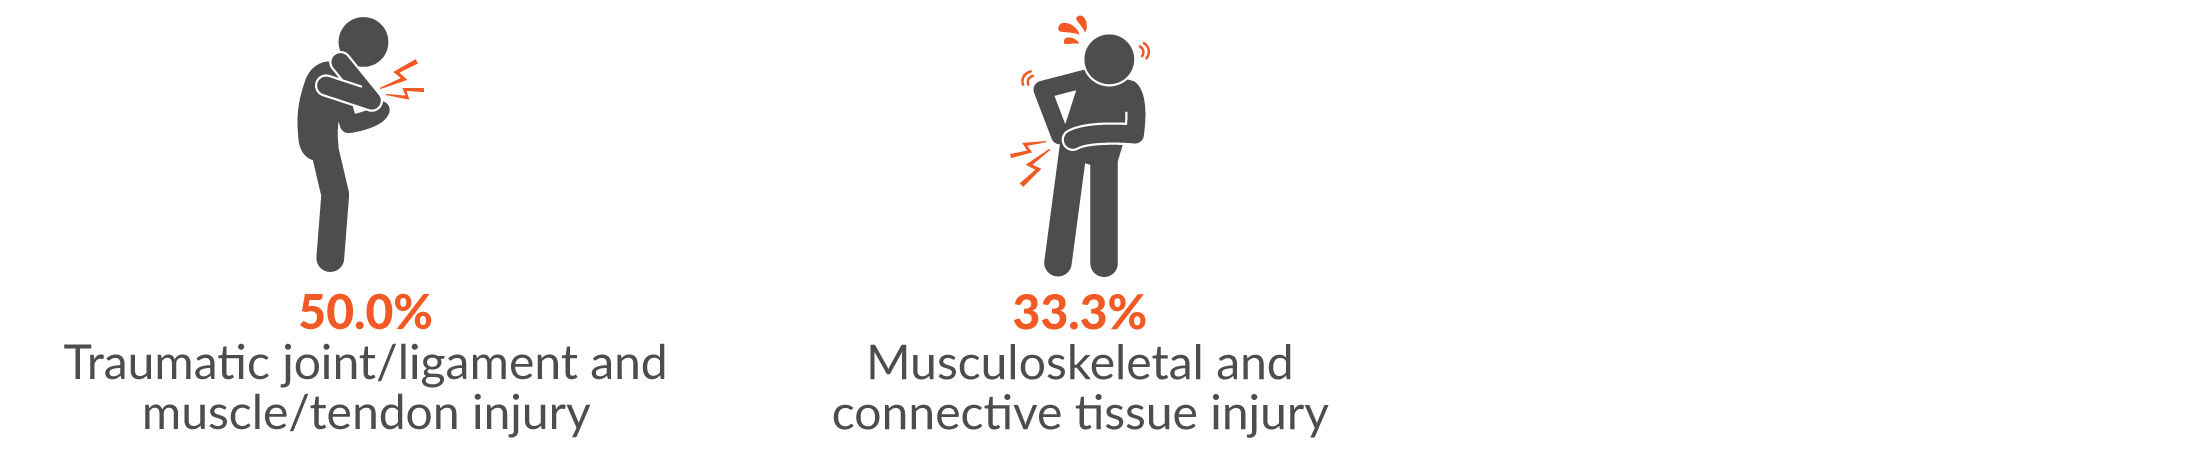 50% traumatic joint/ligament and muscle/tendon injury and 33.3% musculoskeletal and connective tissue injury.